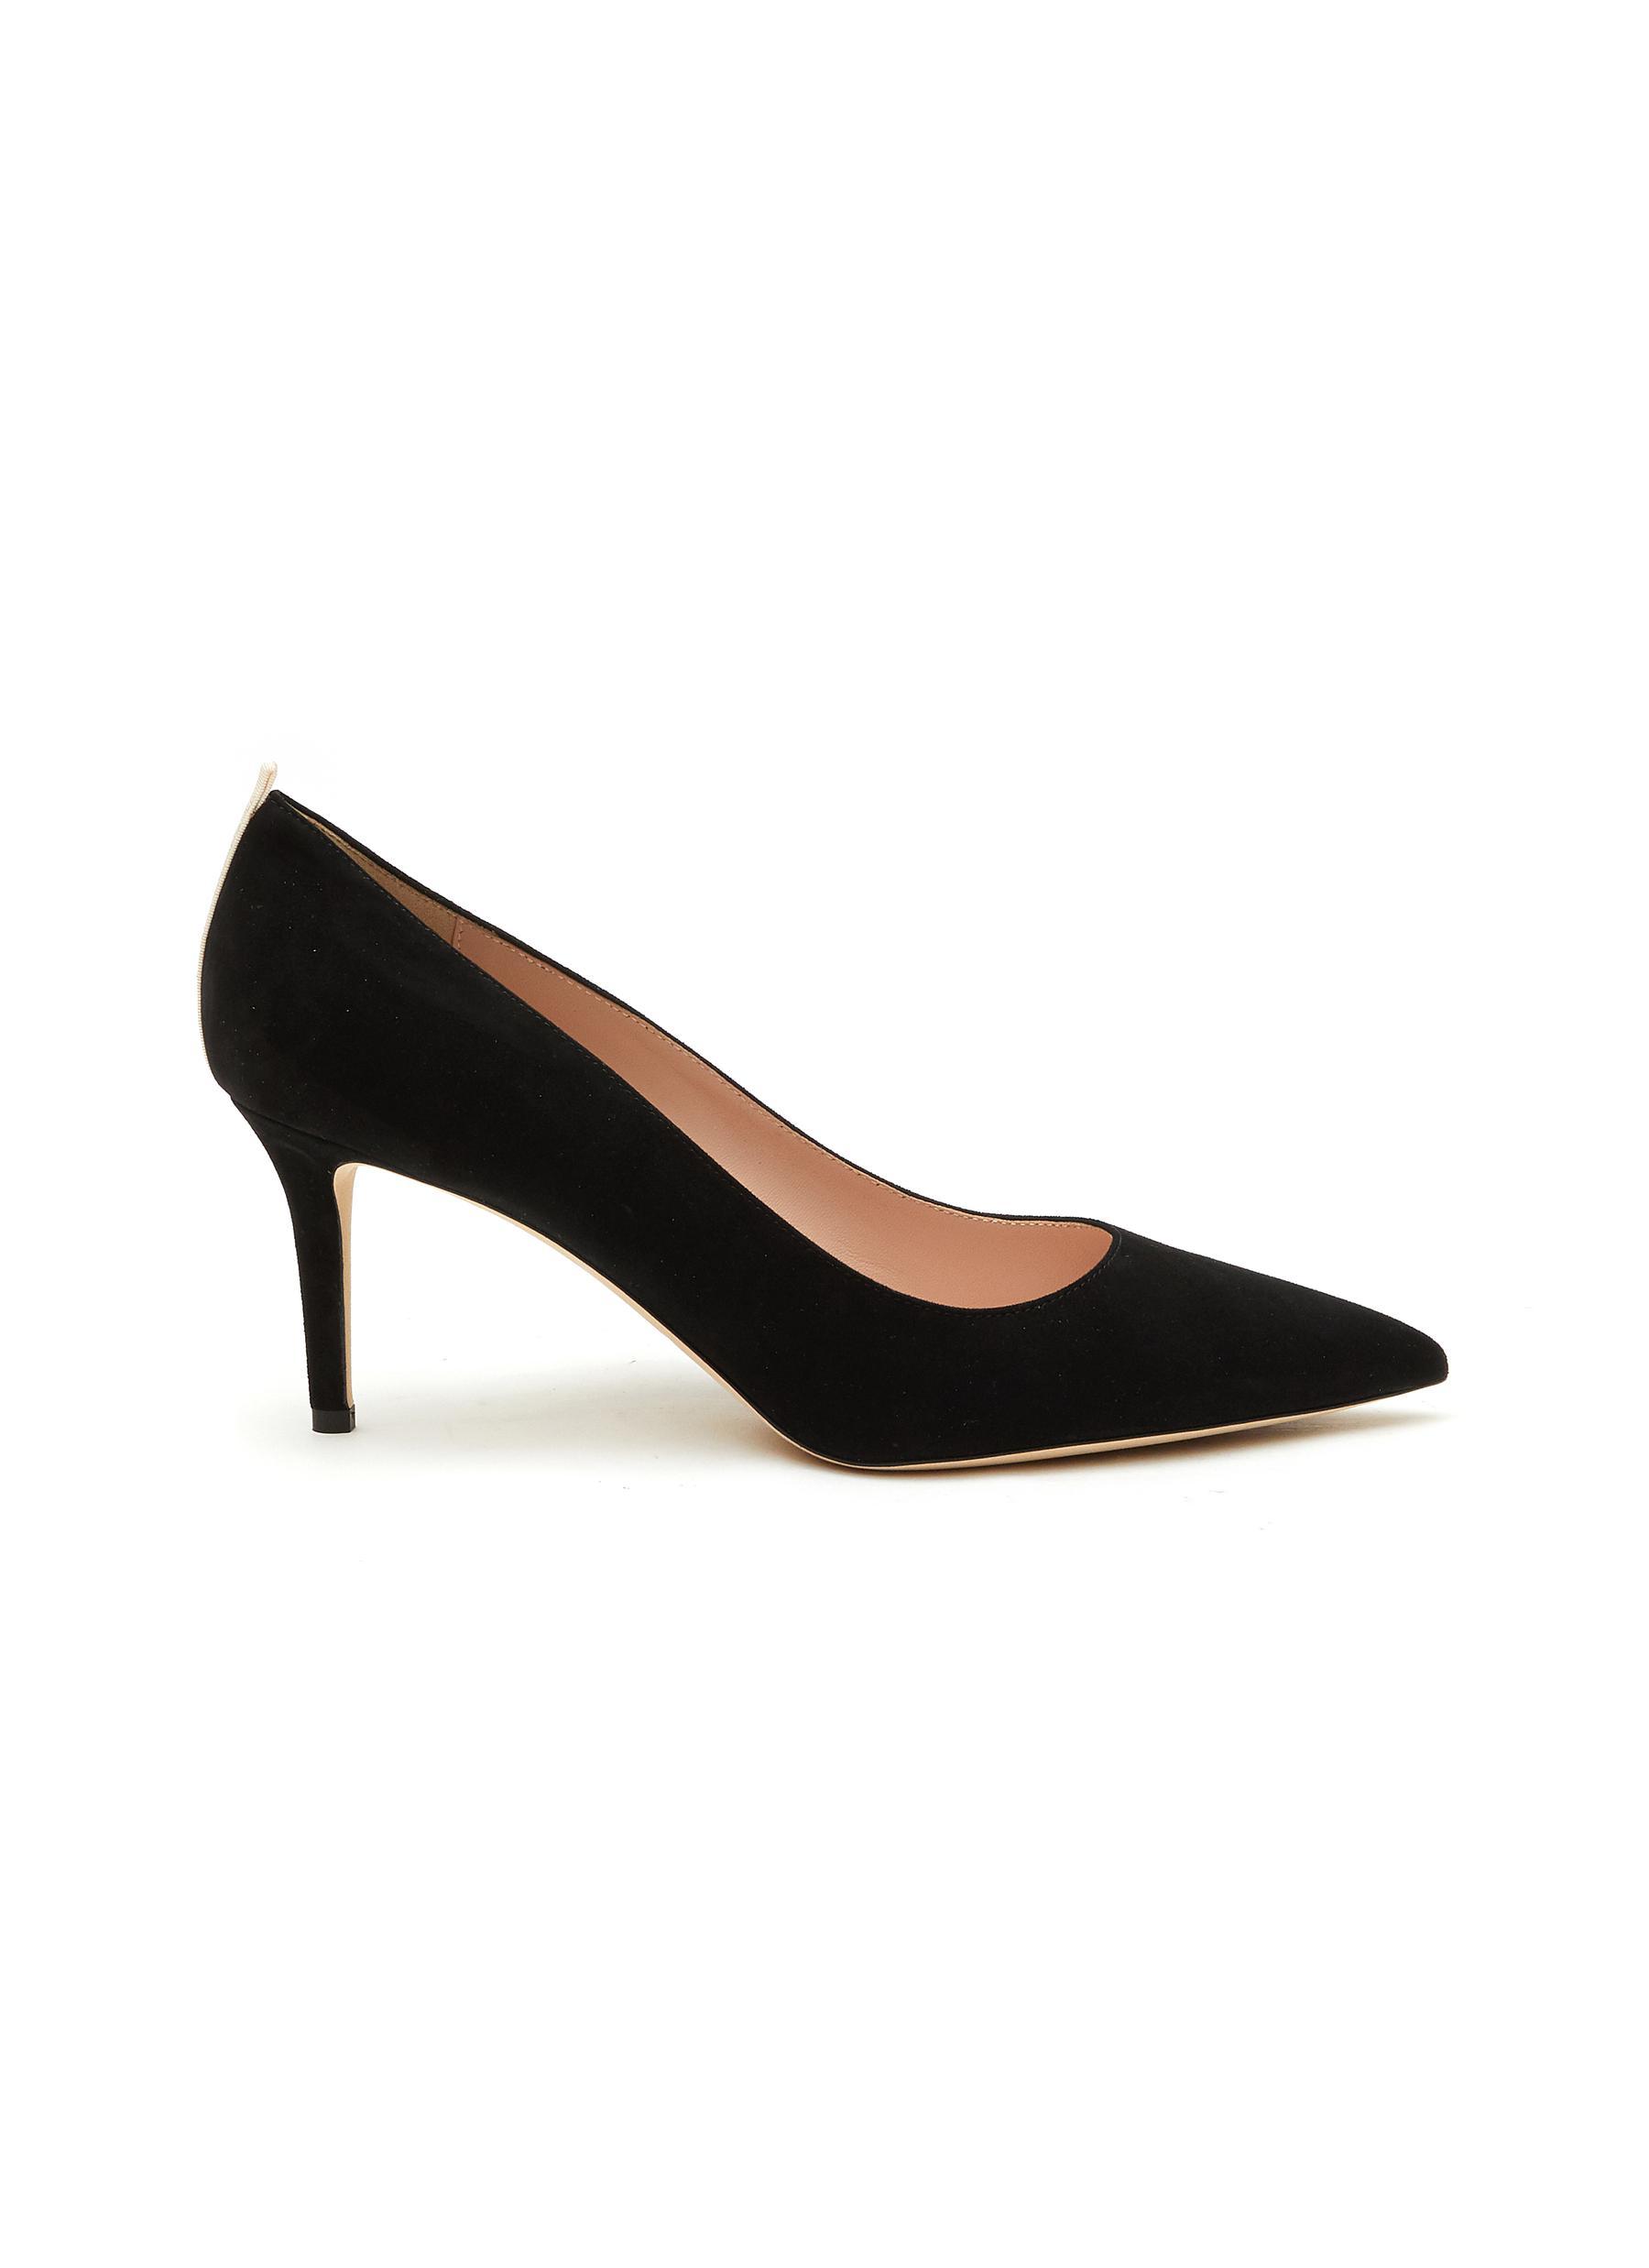 SJP by Sarah Jessica Parker 'fawn' 70 Suede Point Toe Pumps in Black | Lyst